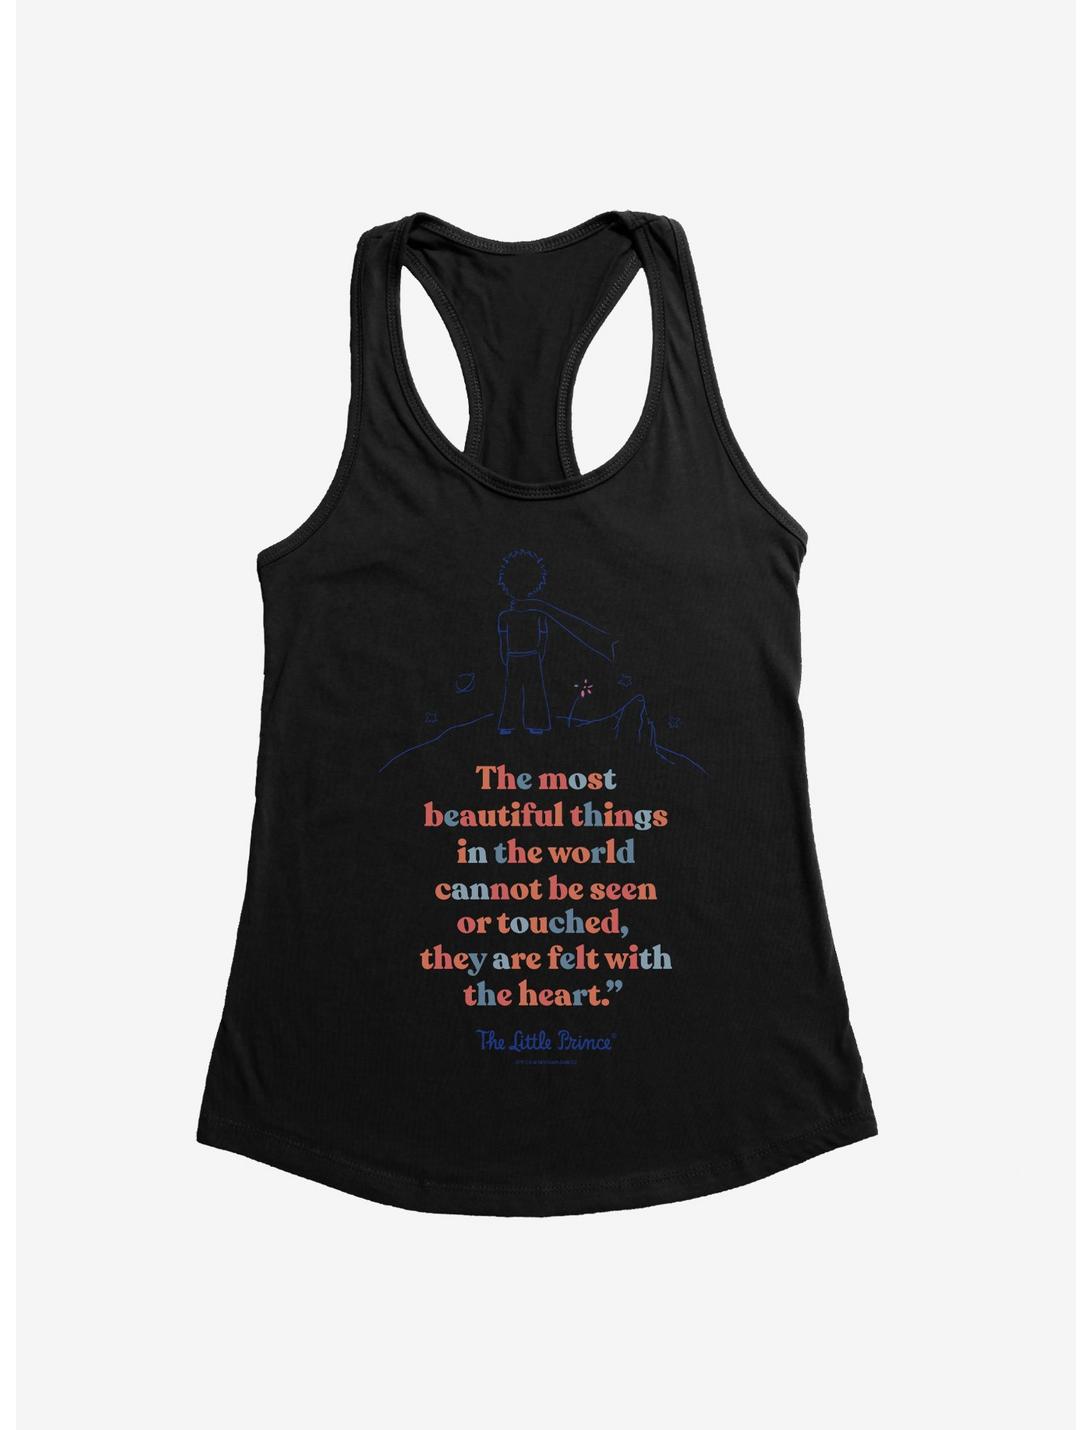 The Little Prince Most Beautiful Things Girls Tank, BLACK, hi-res